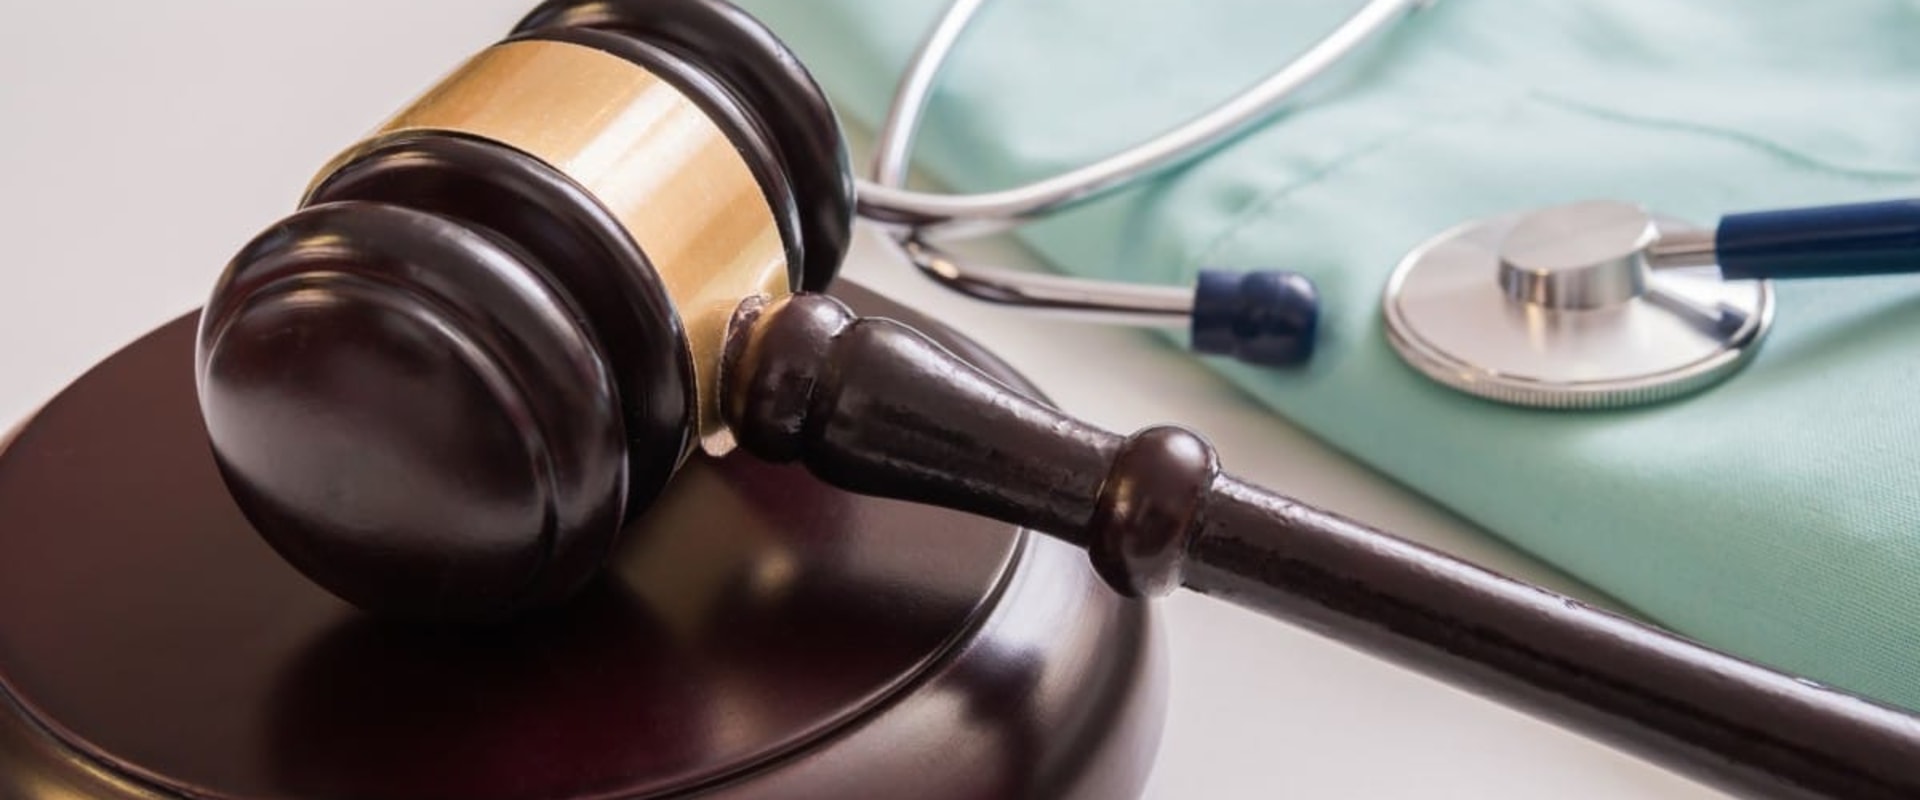 What are the 4 common errors that could lead to a medical malpractice lawsuit?